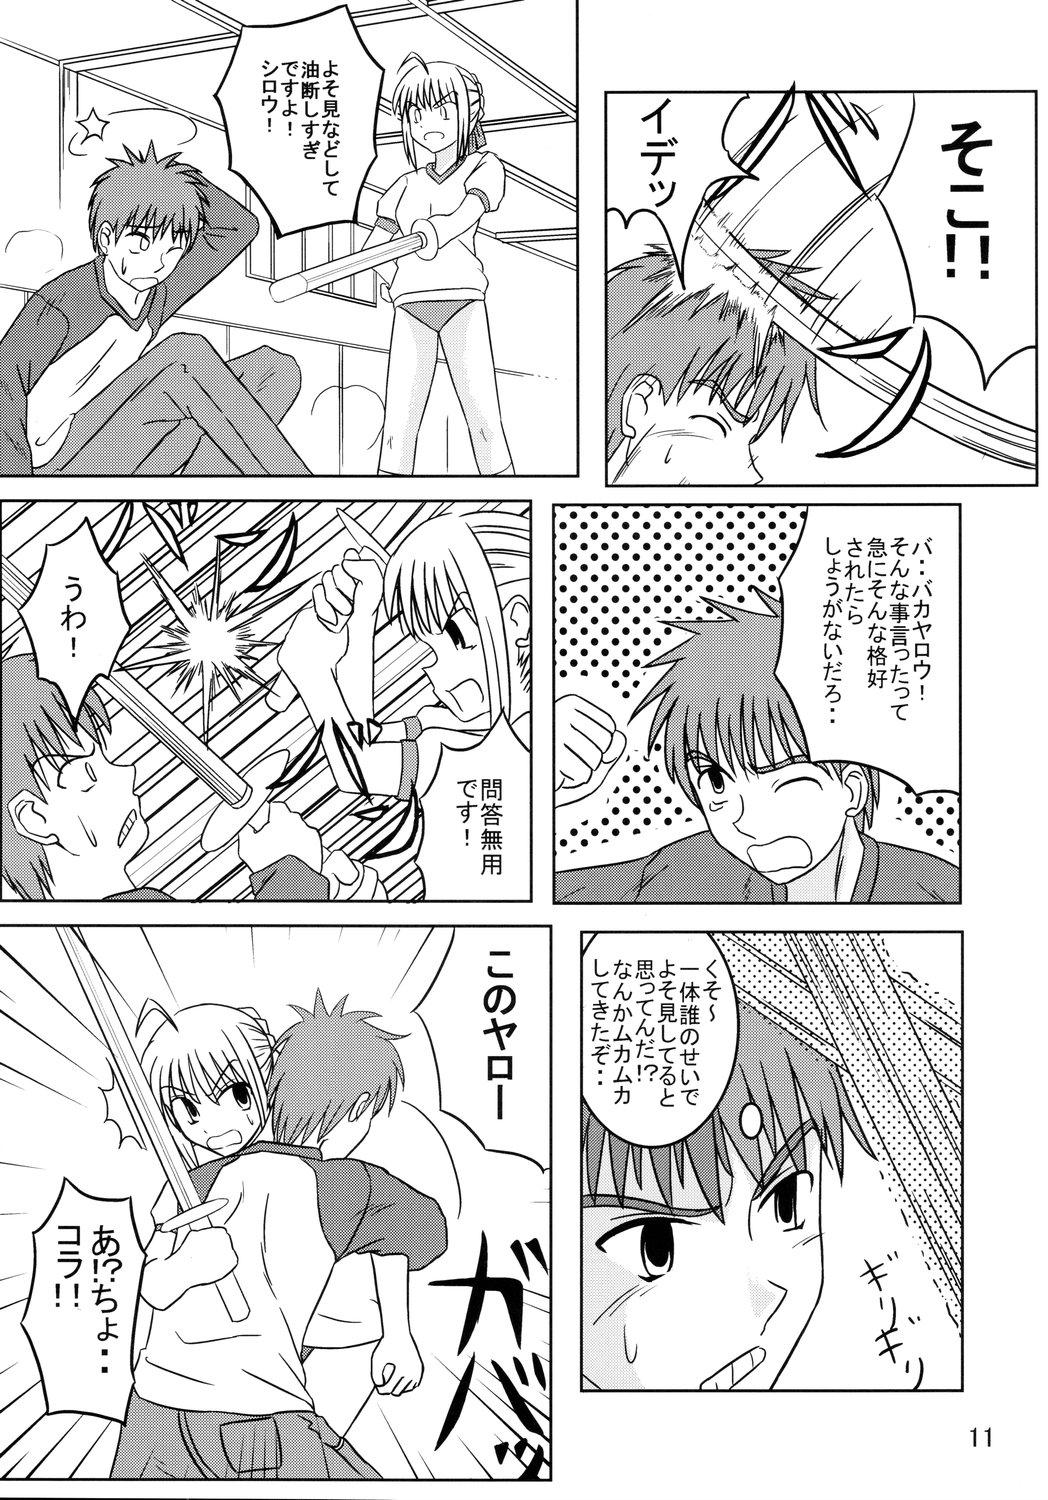 Tanga Saber Of Sanity - Fate stay night Shower - Page 10